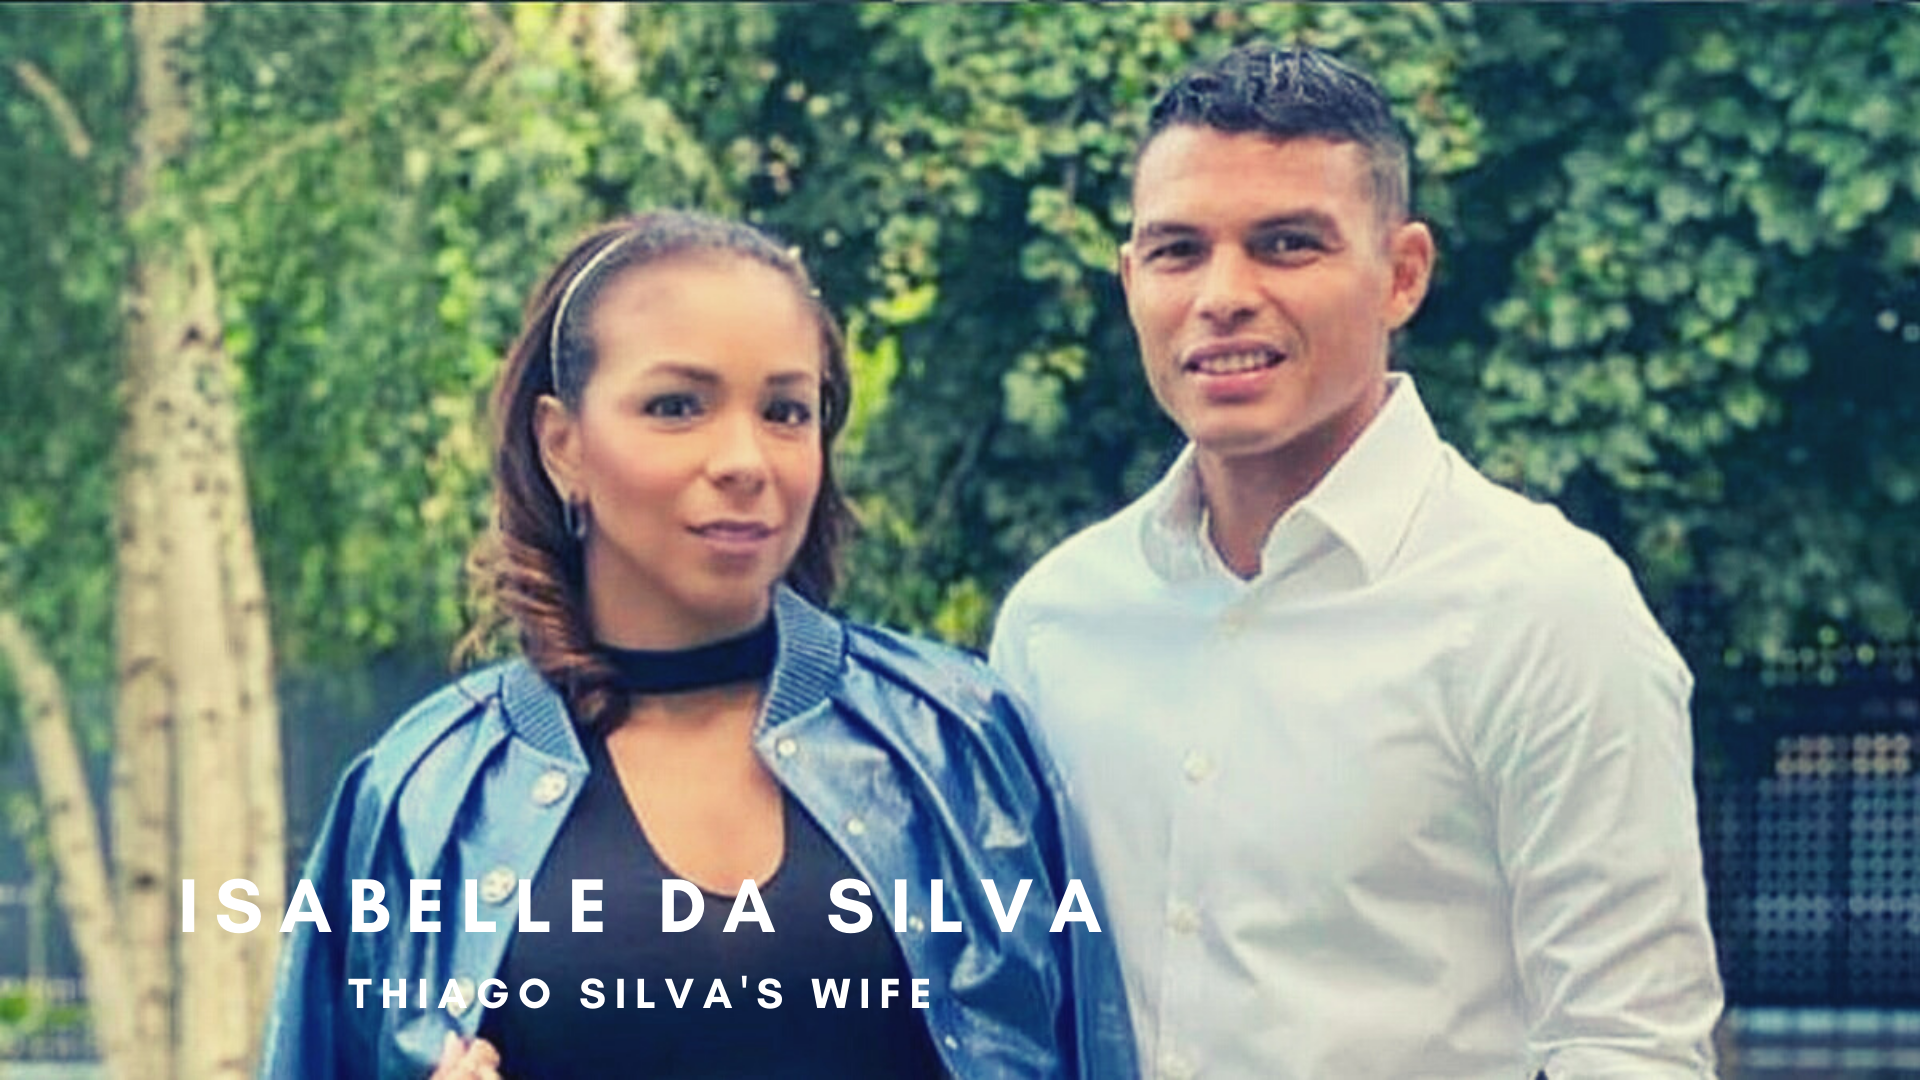 Thiago Silva Wife Isabelle da Silva Wiki 2022- Age, Net Worth, Career, Kids, Family and more. (Original Image: As found on the Mirror via Google image search)